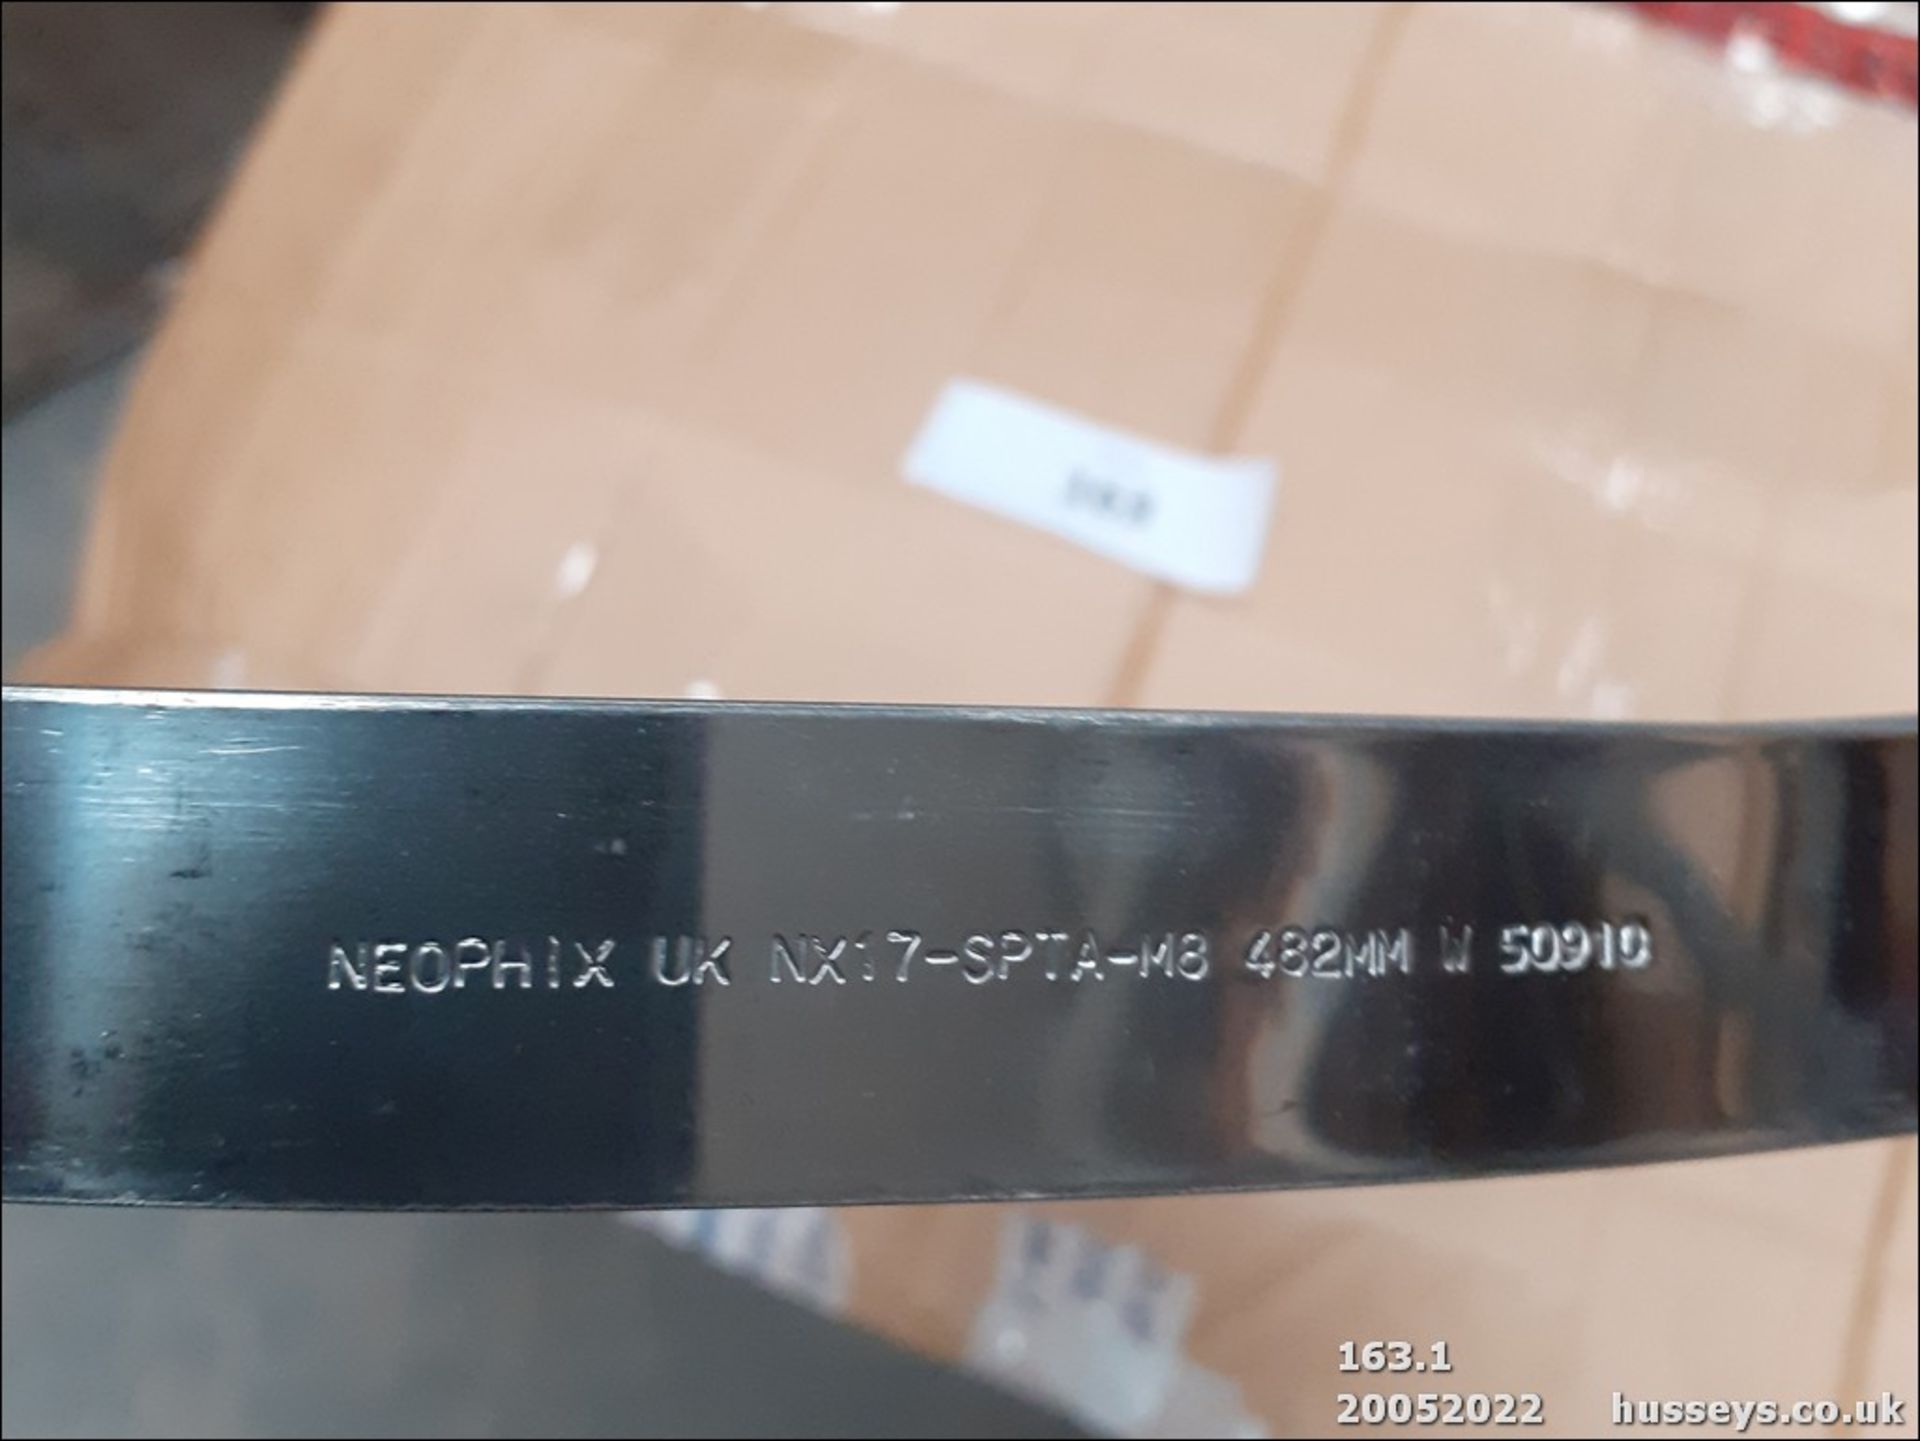 Neophix complete Clamp NX17-SPTA-M8 W 50910 Stainless 482mm (Qnty: 1) - Image 2 of 2